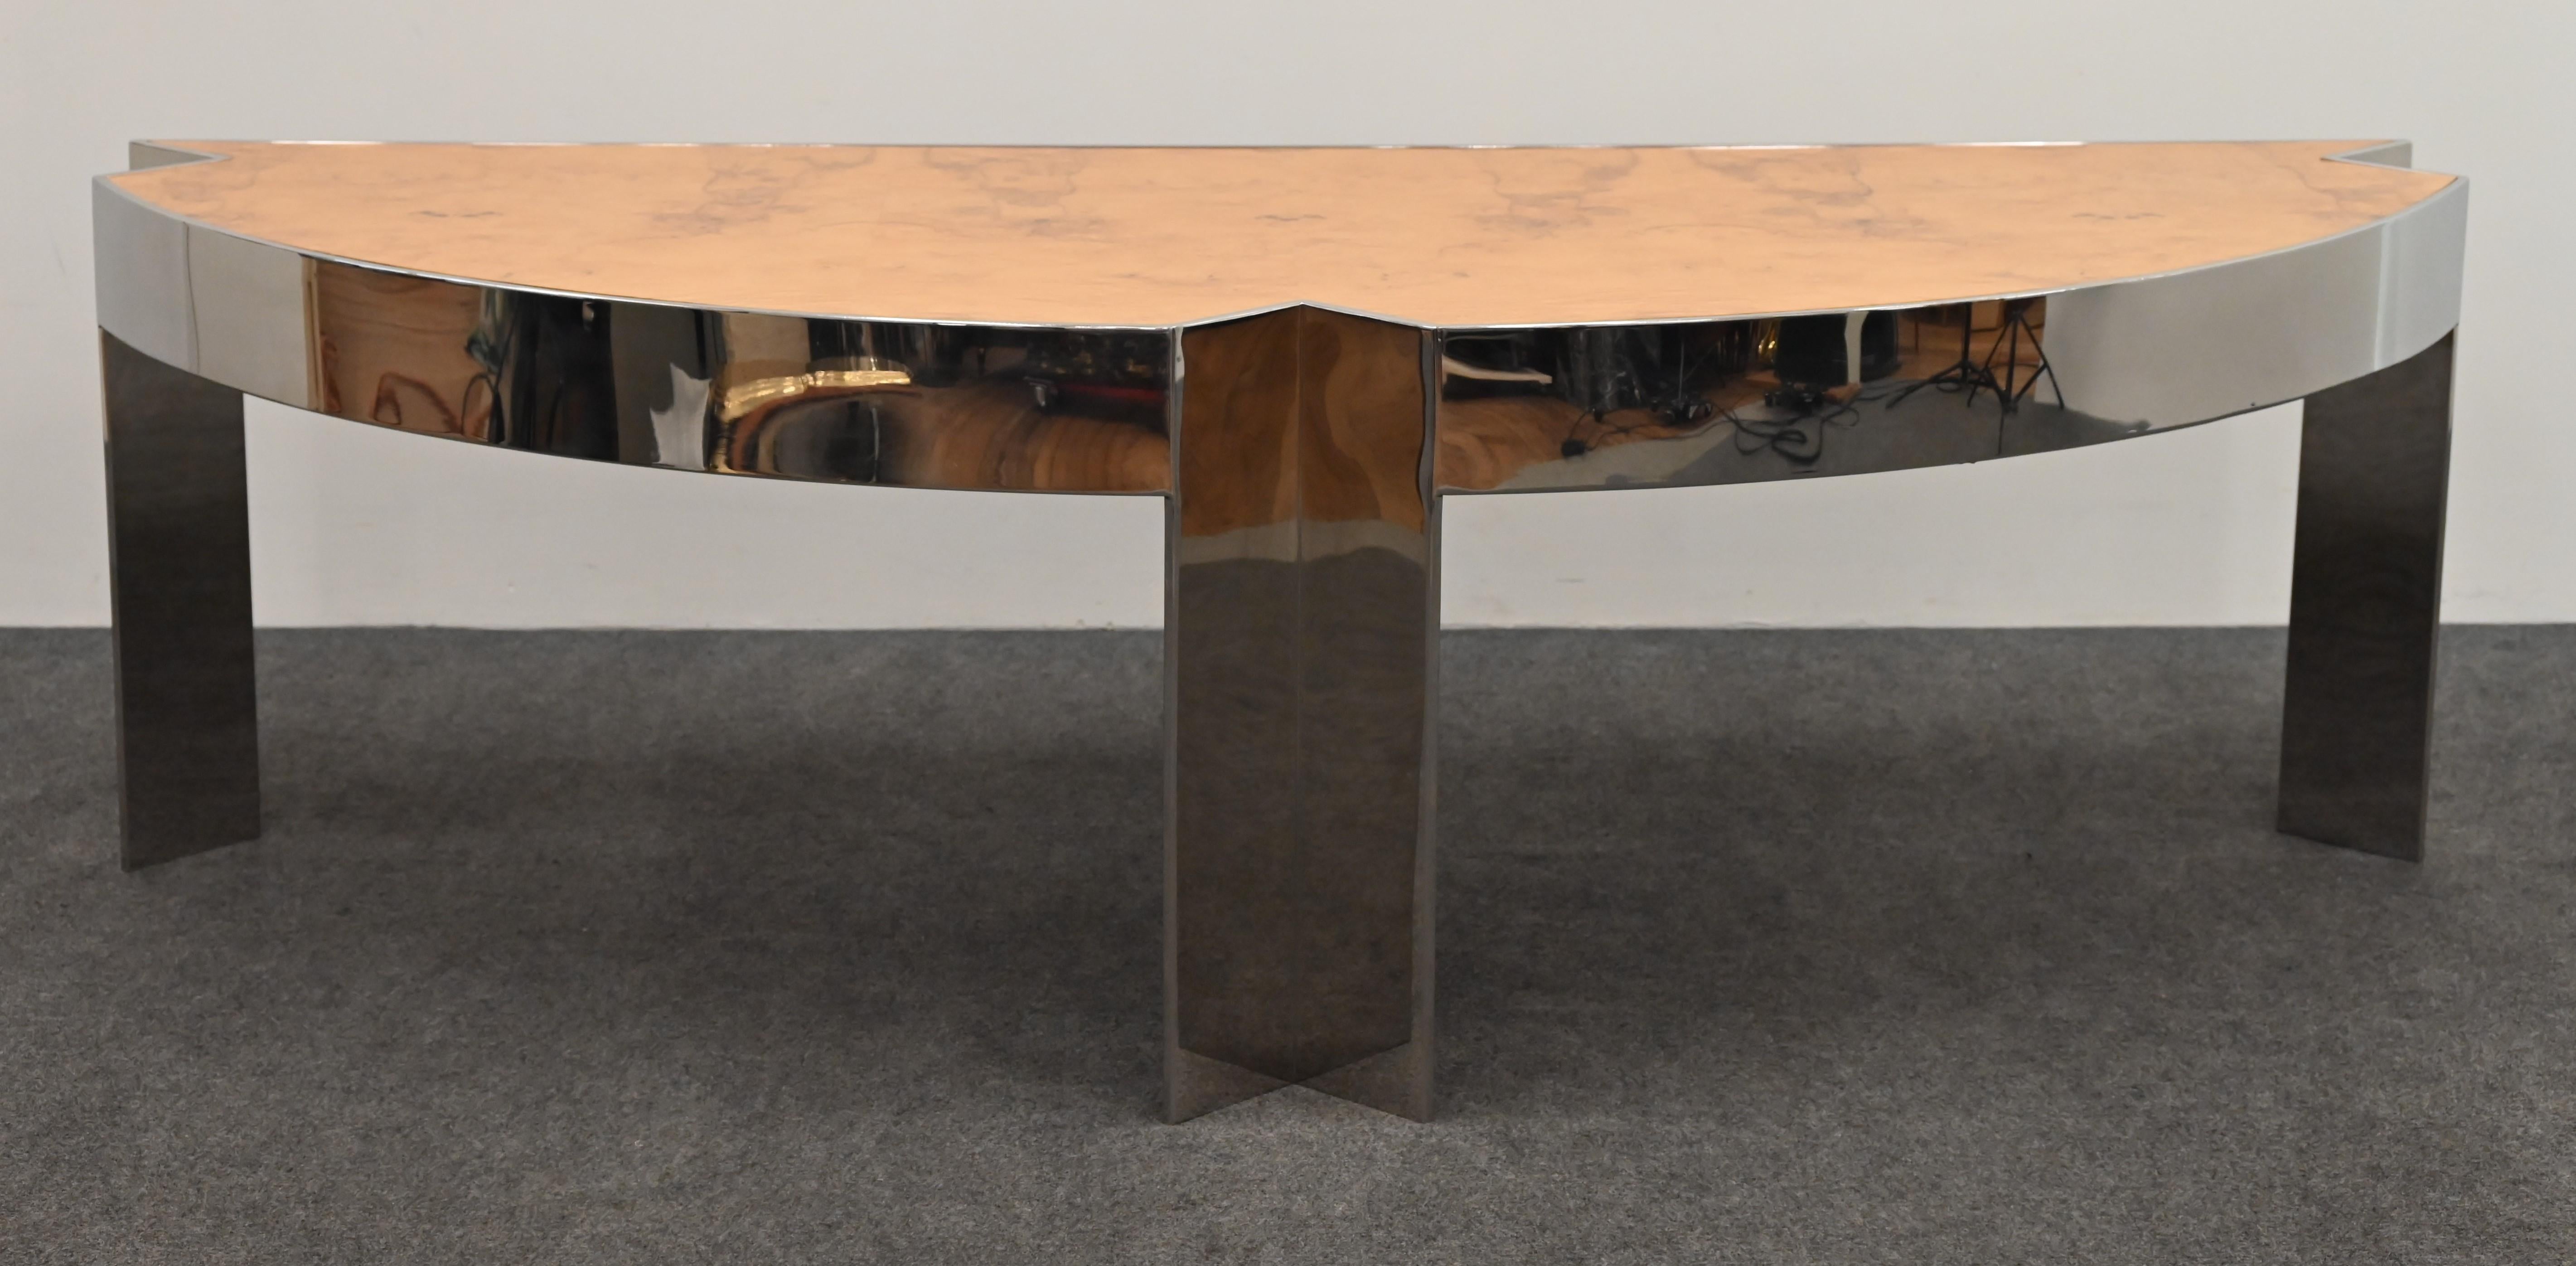 Stainless Steel and Burl Wood Desk by Leon Rosen for Pace, 1980s For Sale 7